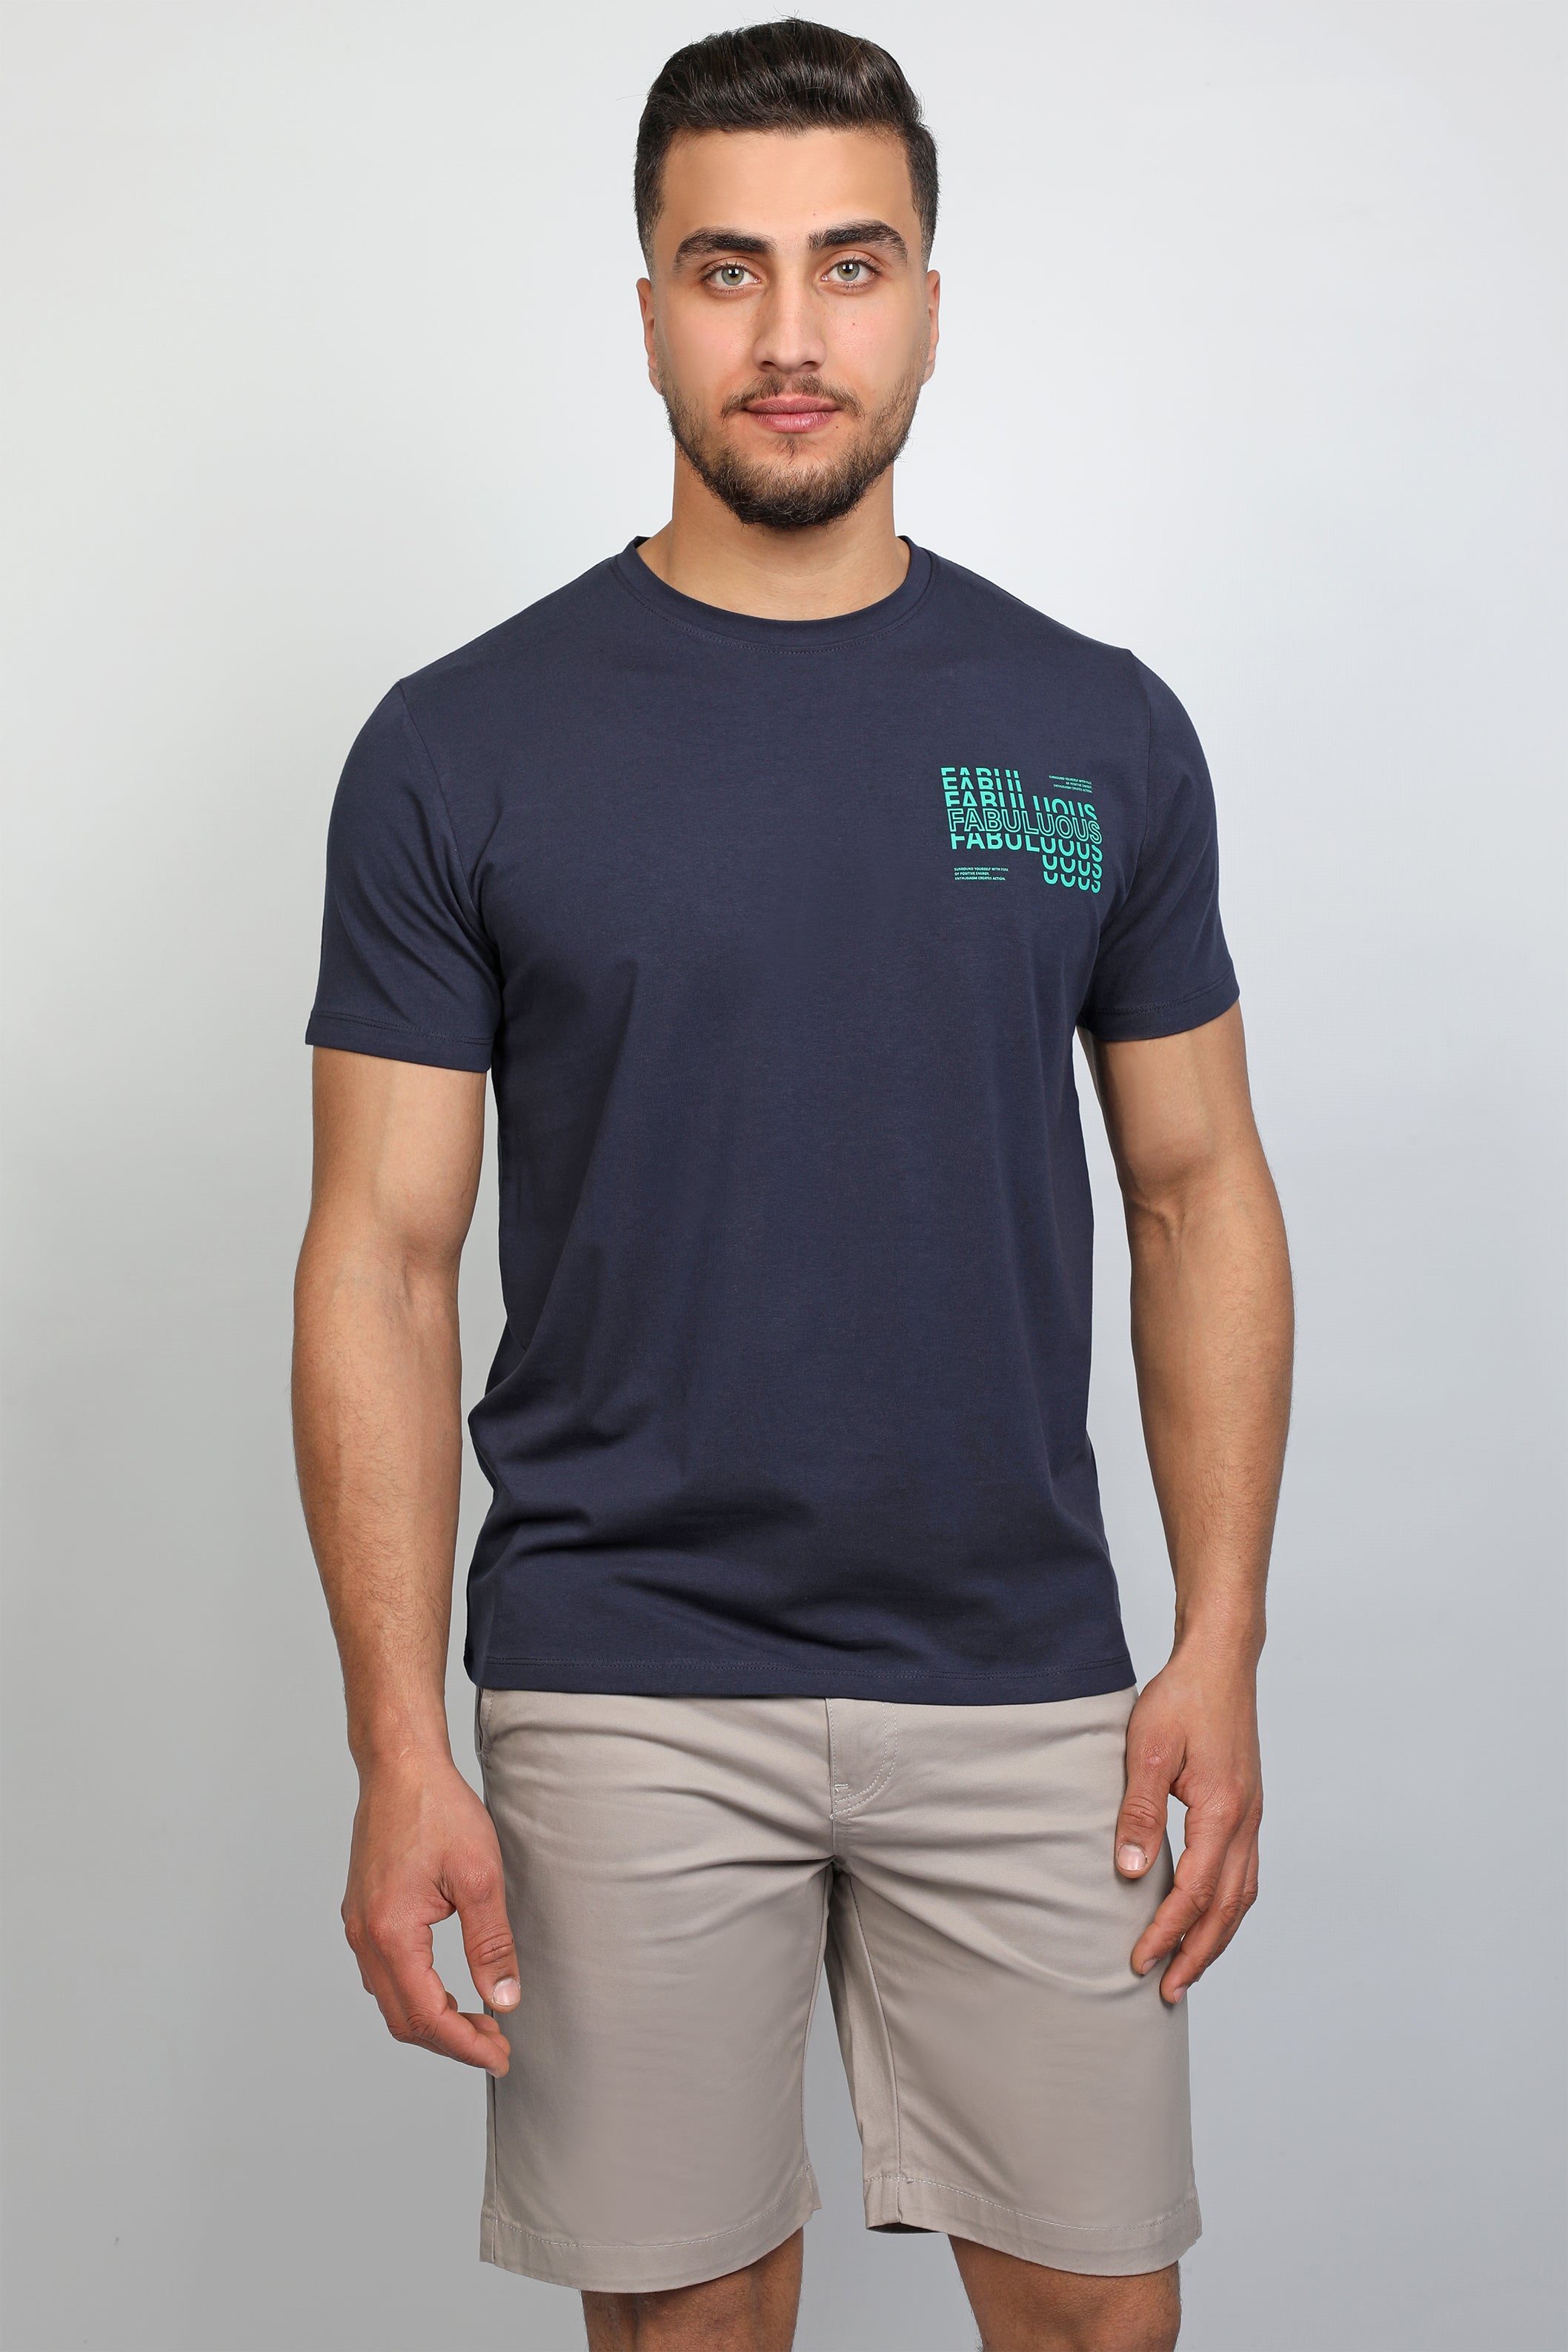 Men Navy T-shirt With Fabuluous Design On Front